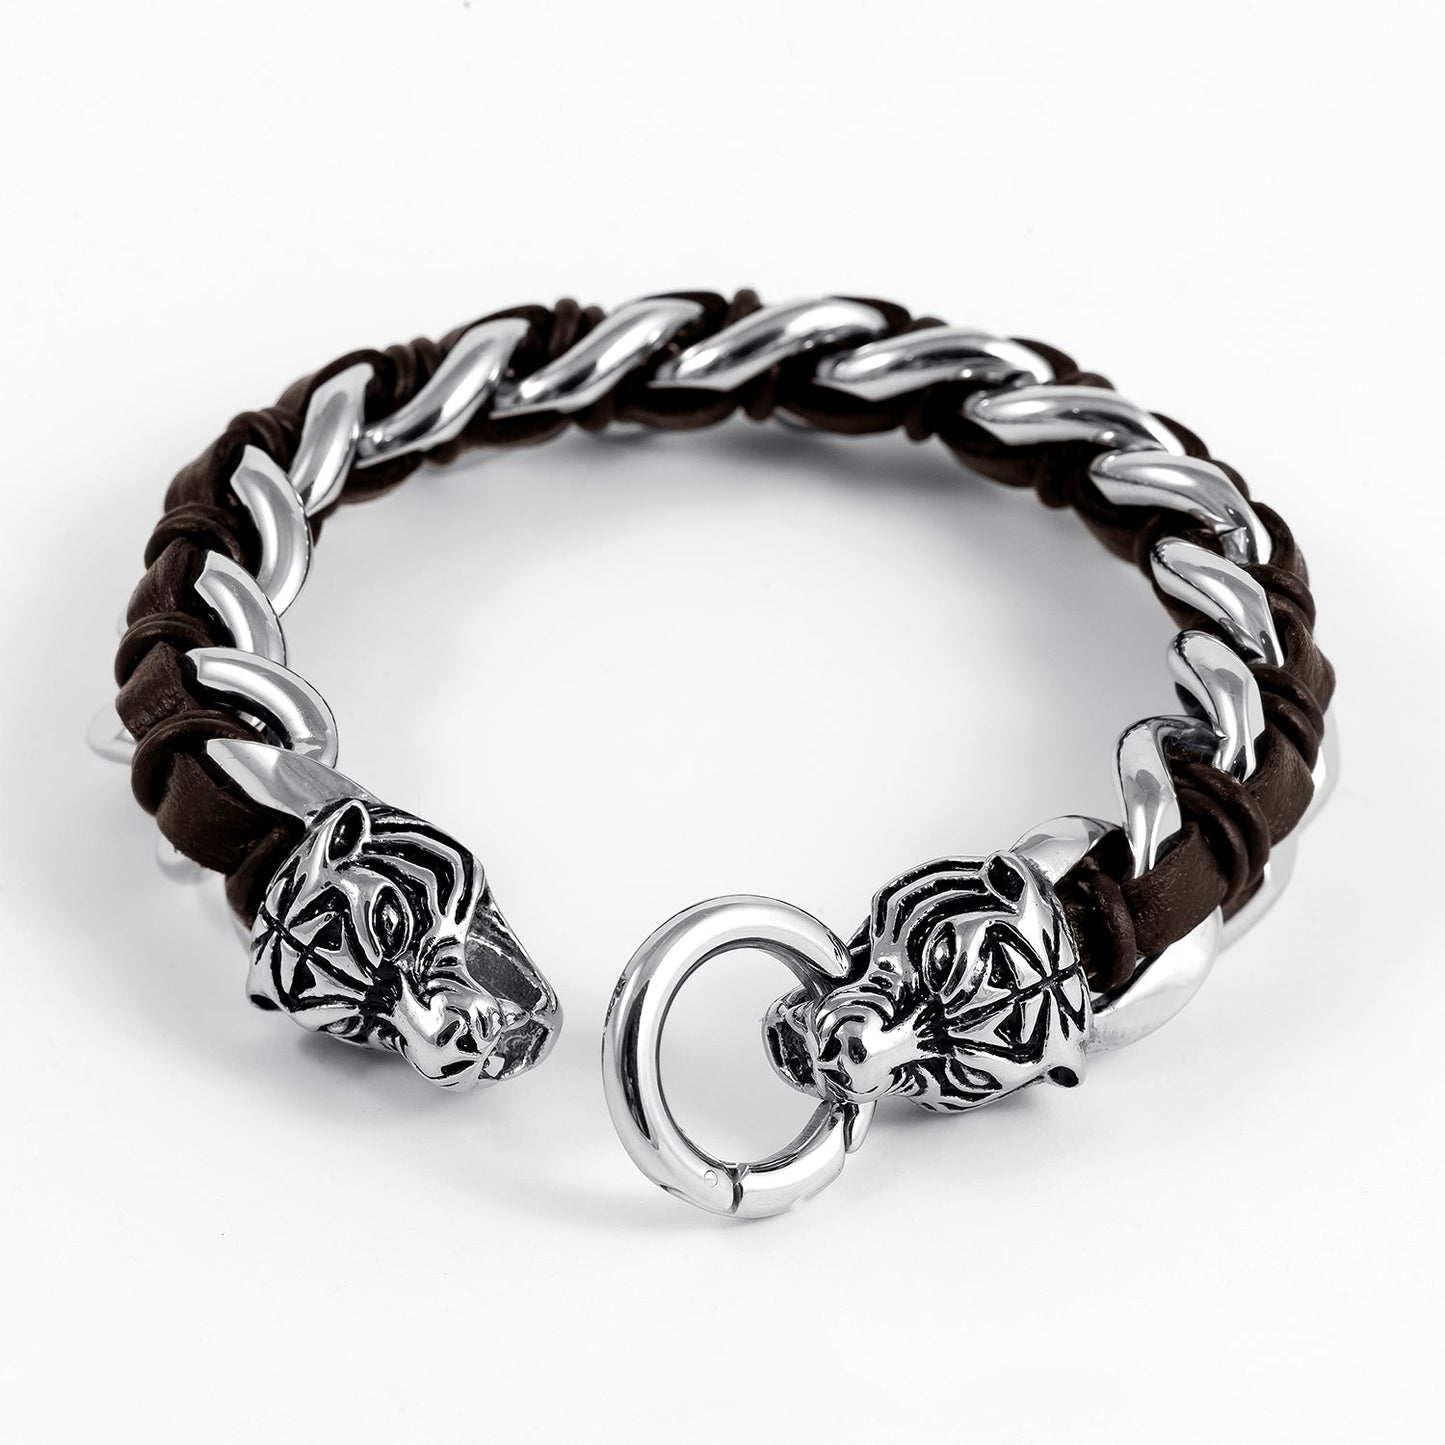 Heavy Stainless Steel Viking Tiger Head with Leather Bracelet - SilverMania925